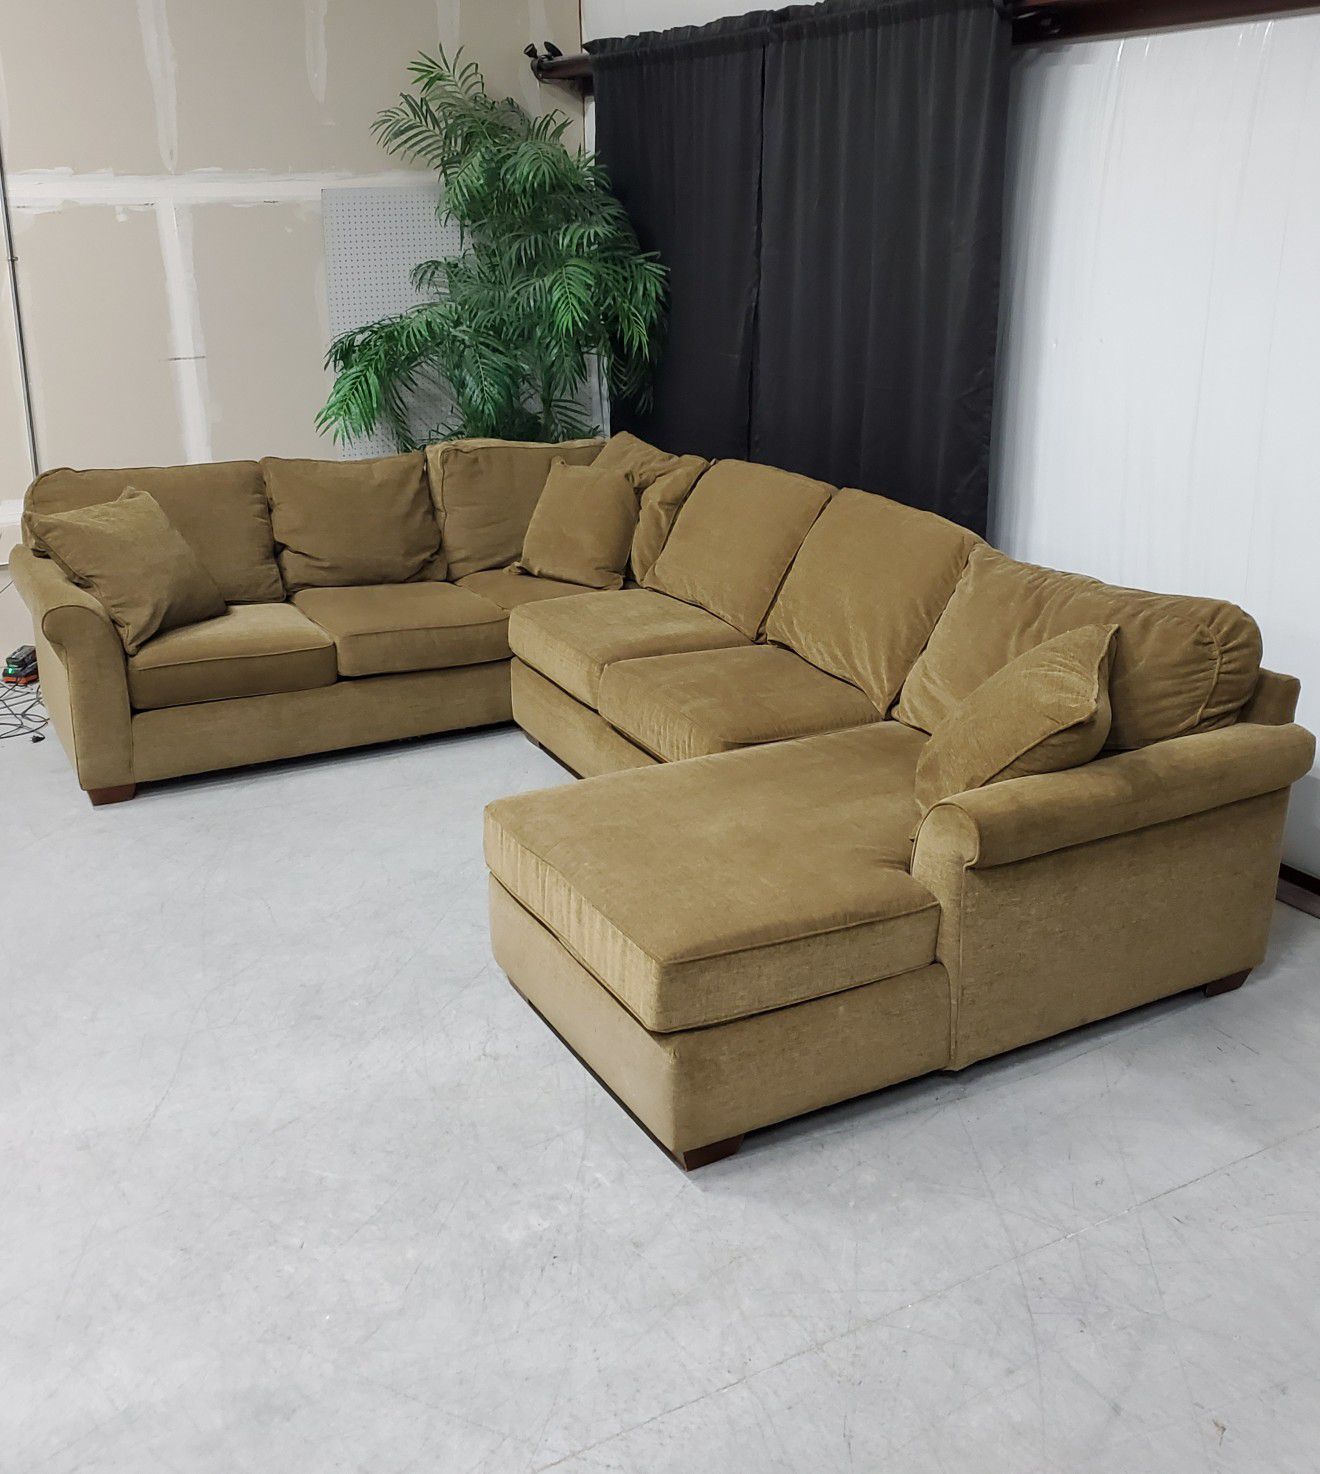 BIG "NORFOLK" HAVERTYS SECTIONAL COUCH 🚛 cheap delivery!